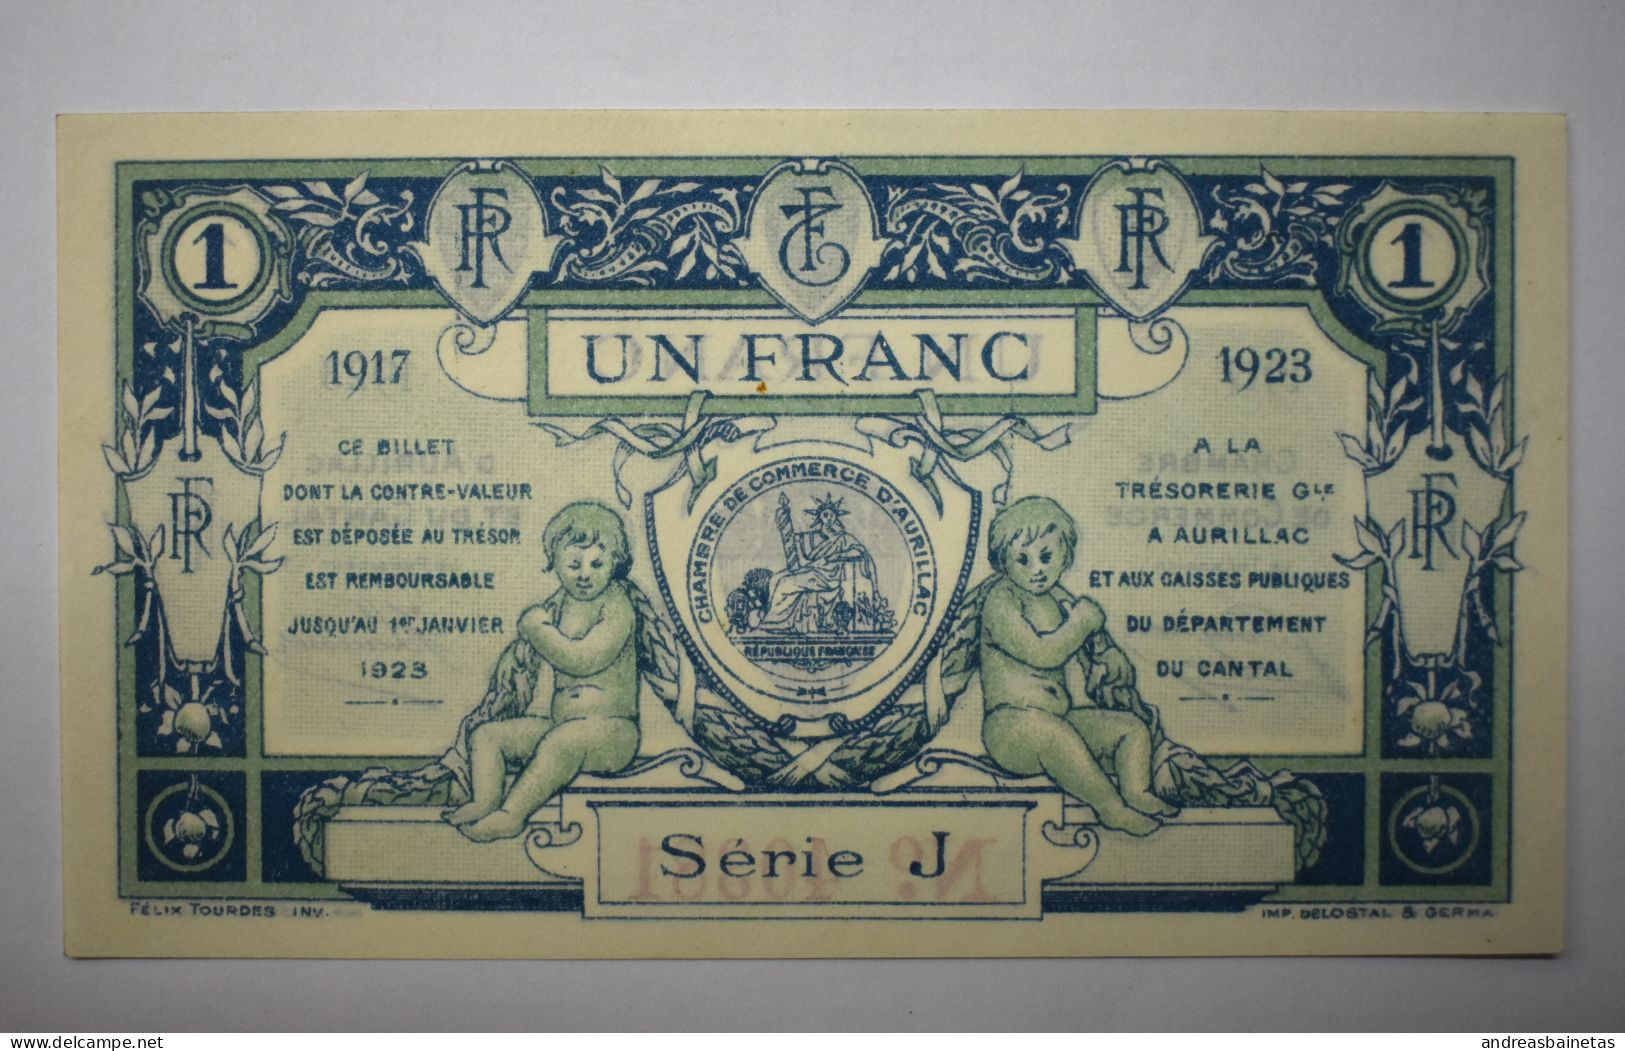 Banknotes France 1 Franc (1917-1923) UNC - Chamber Of Commerce